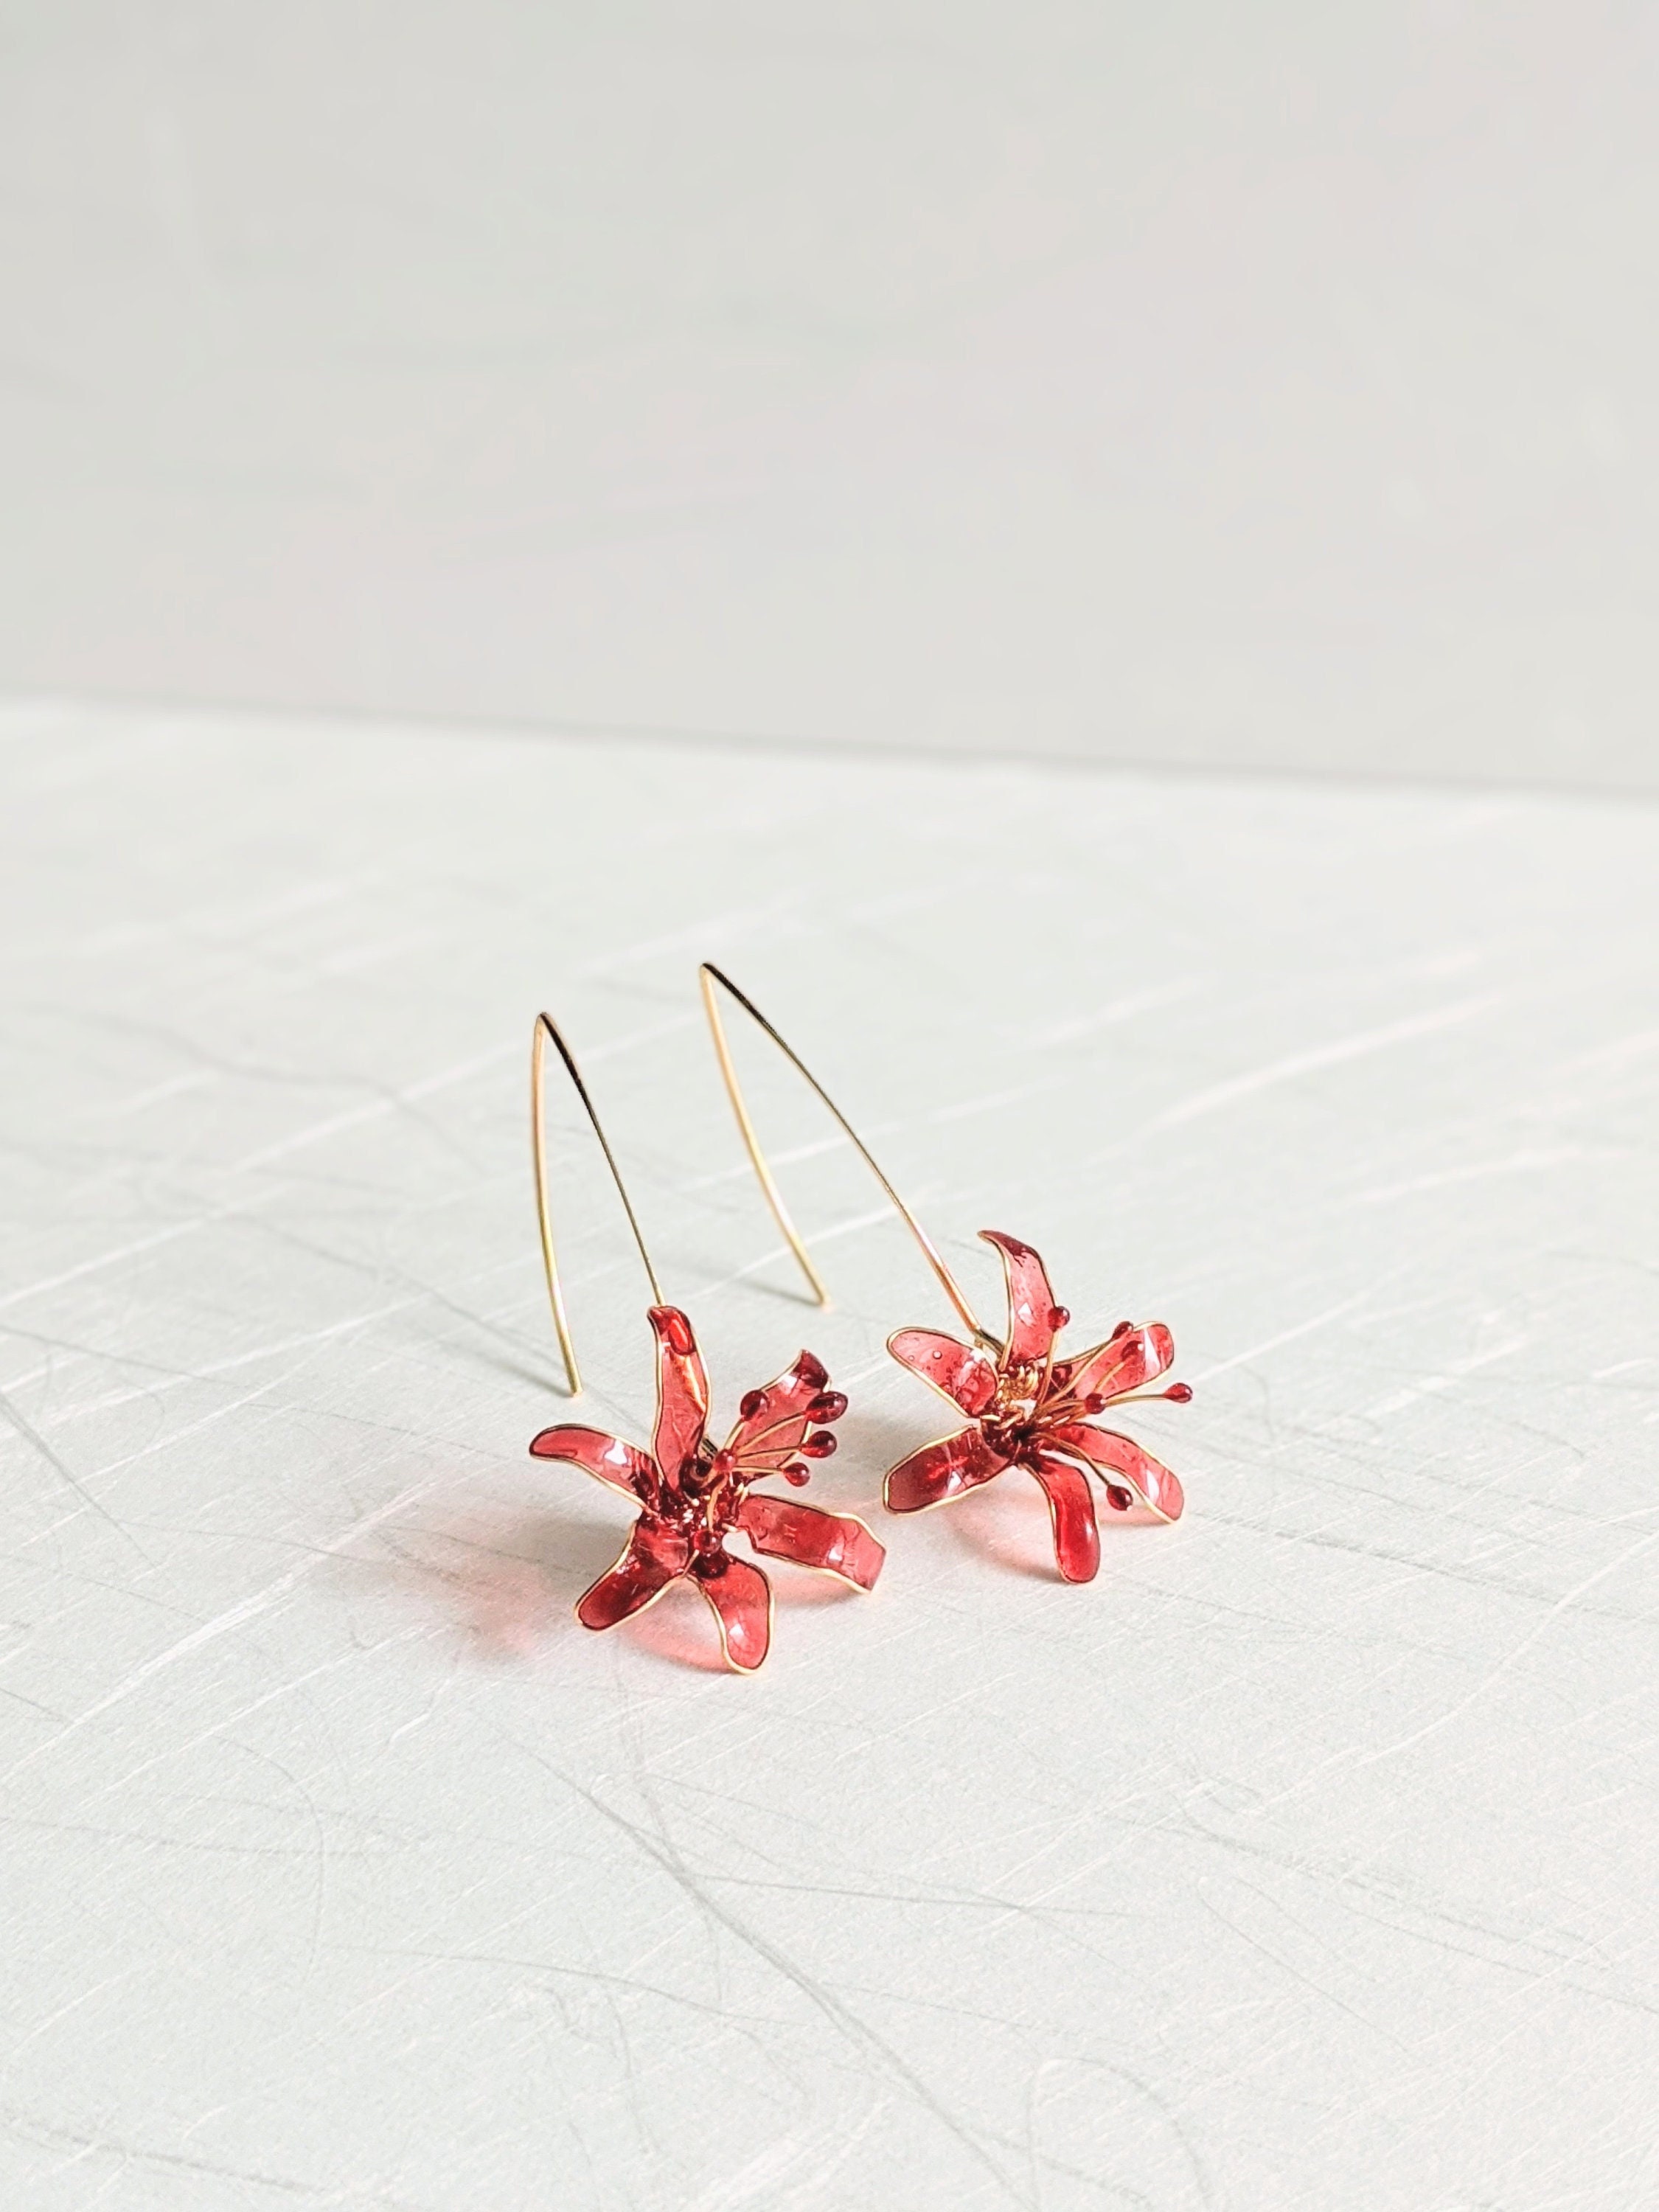 Higanbana Spider Lily Earrings Handmade Gold Plated - Etsy